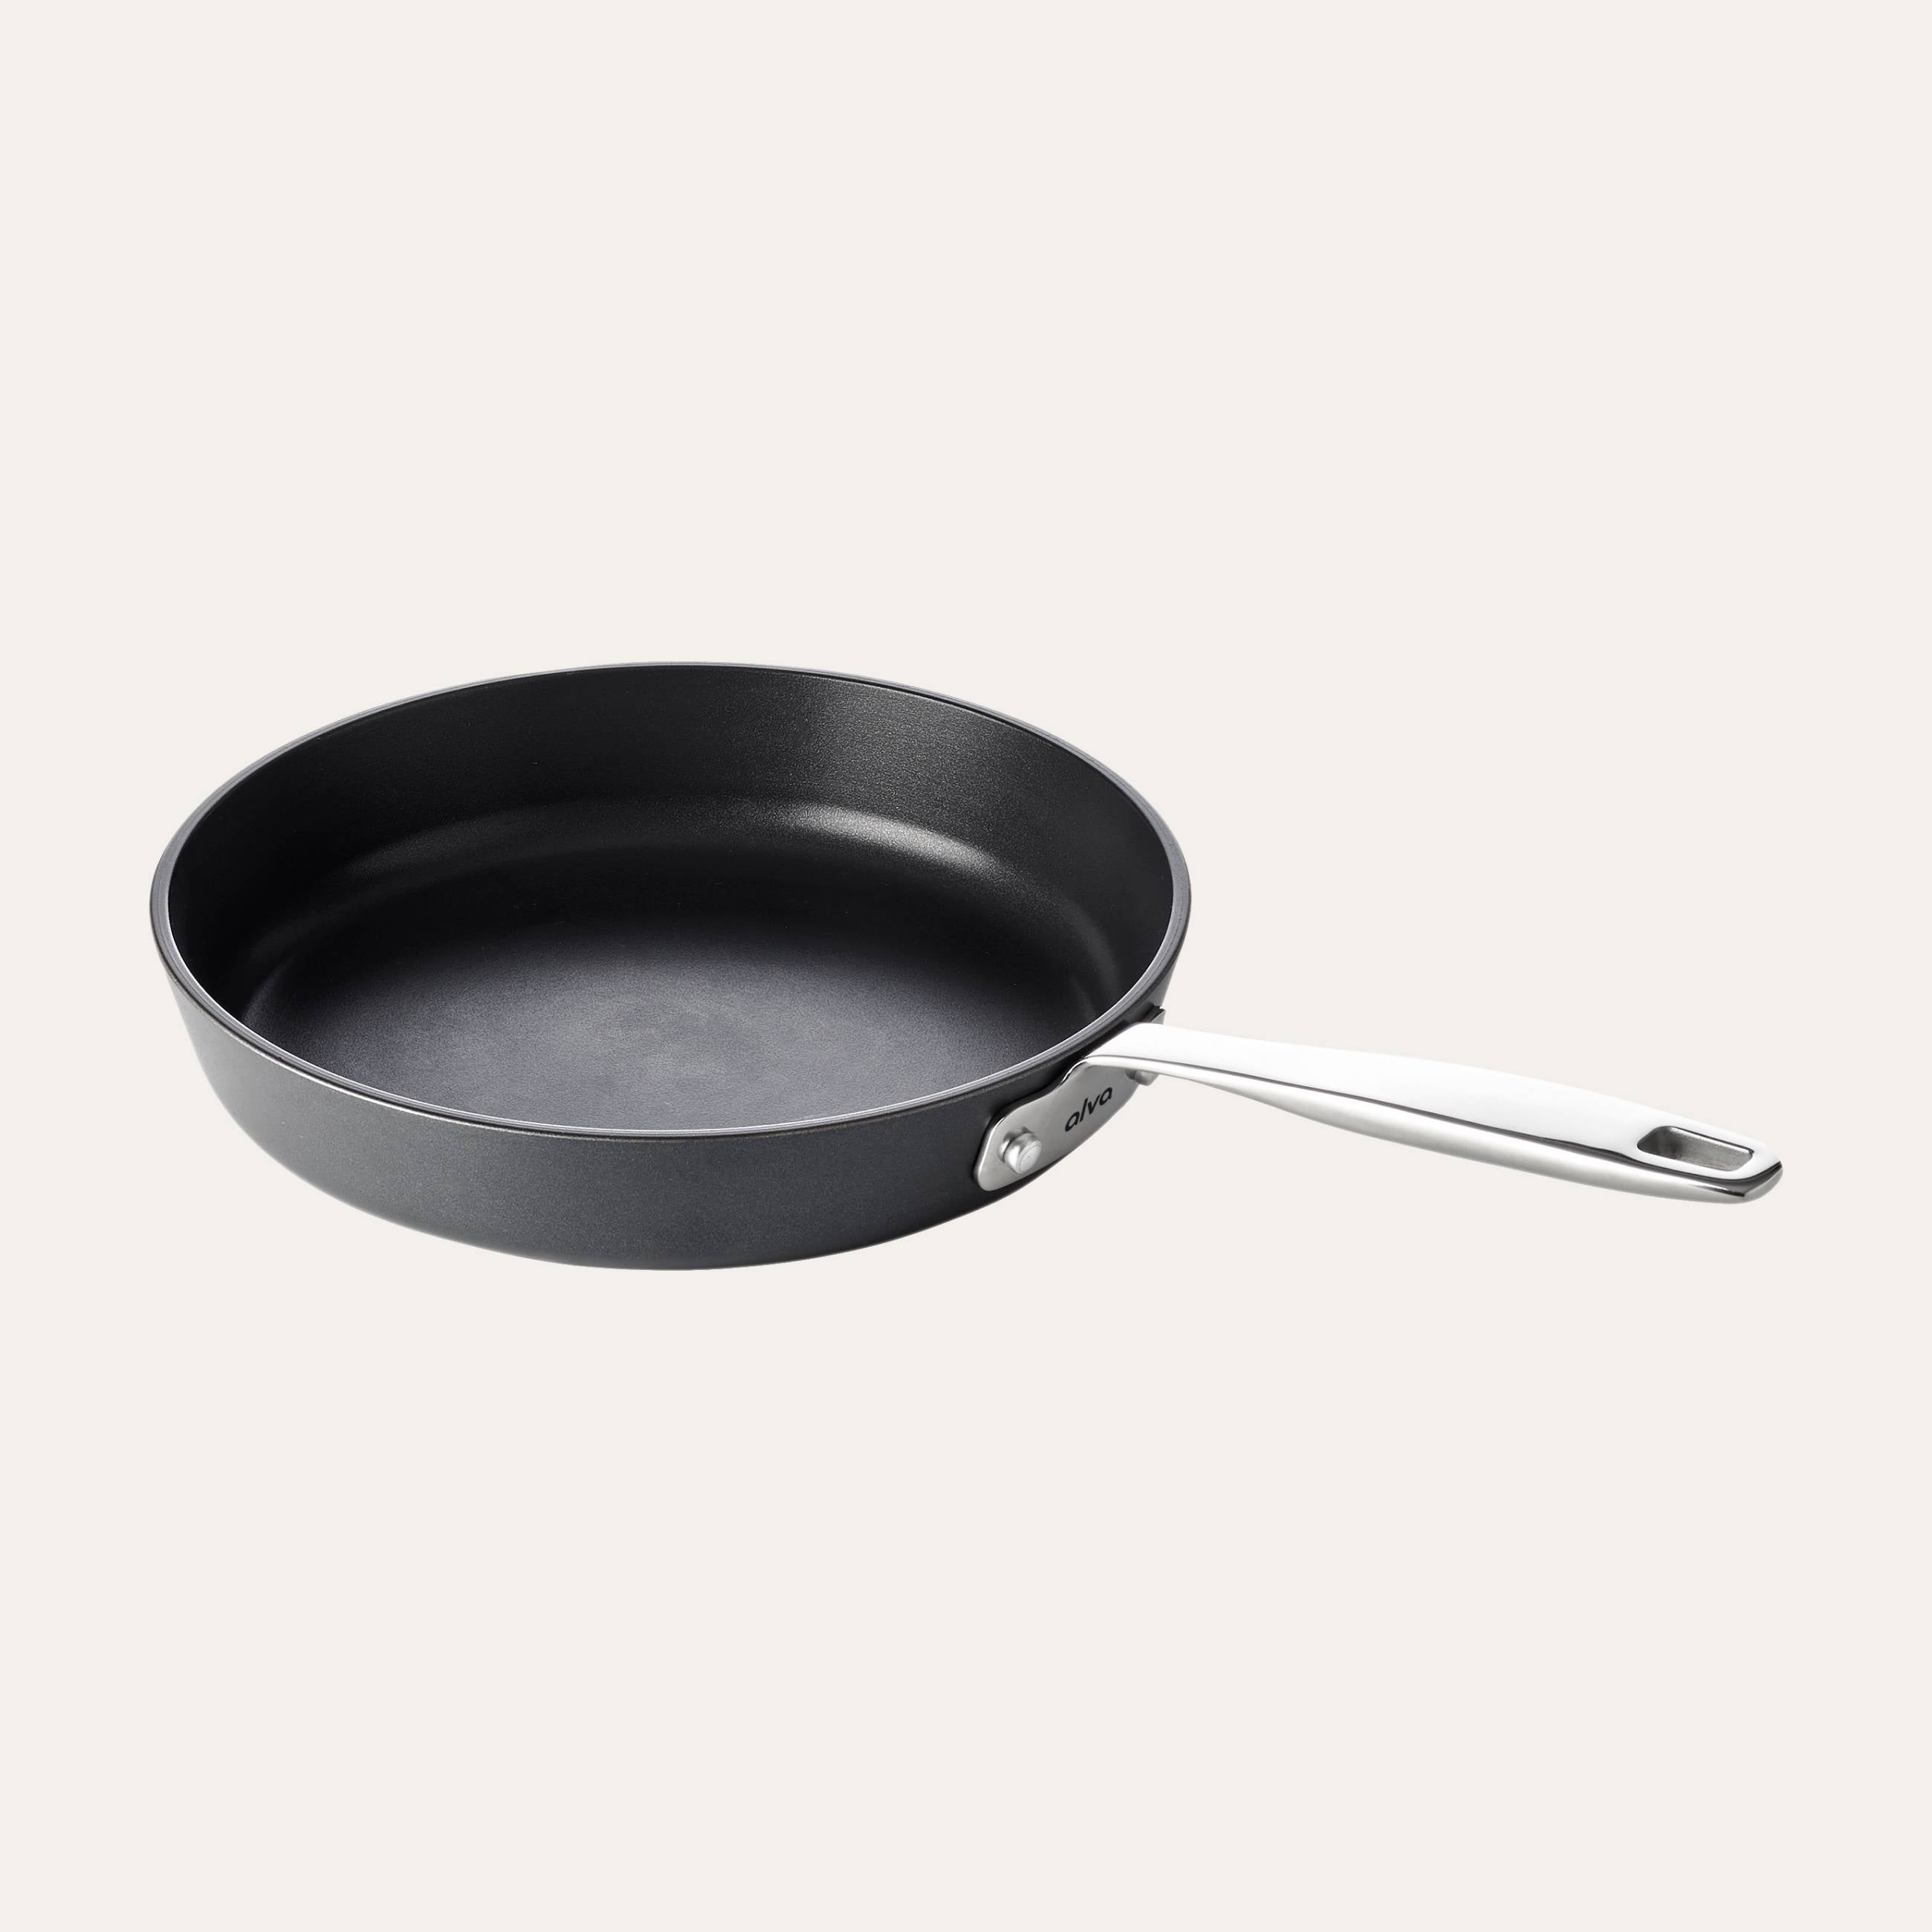 PFAS-free cookware: A non-toxic, nonstick fish pan for your kitchen